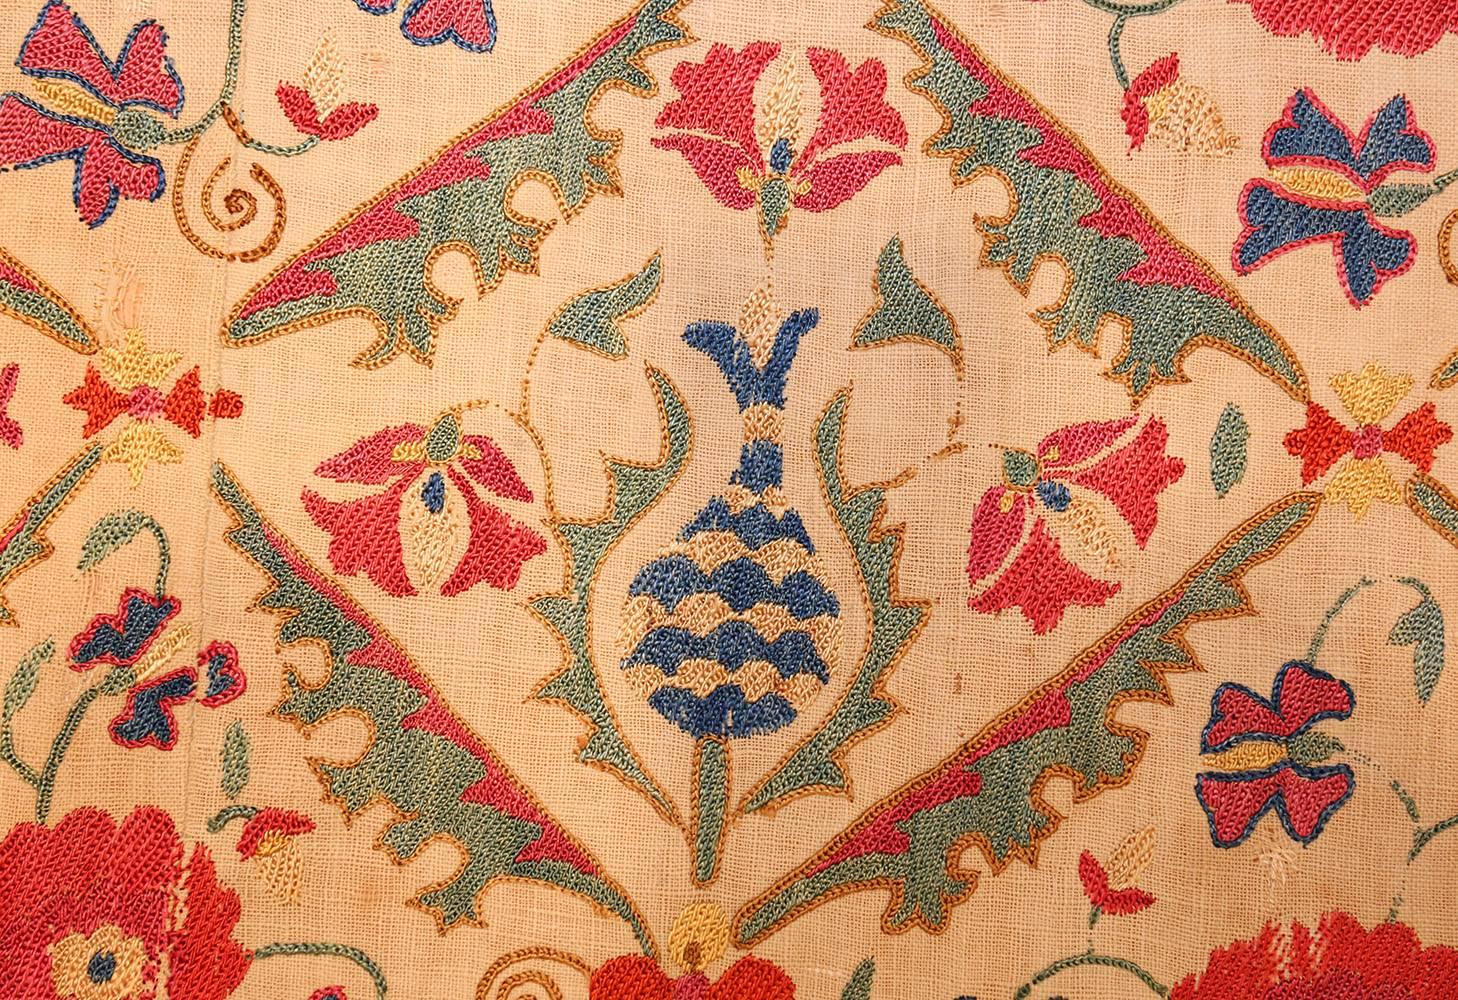 Early 19th Century Suzani Uzbek Textile. Size: 5 ft 4 in x 5 ft 7 in  1